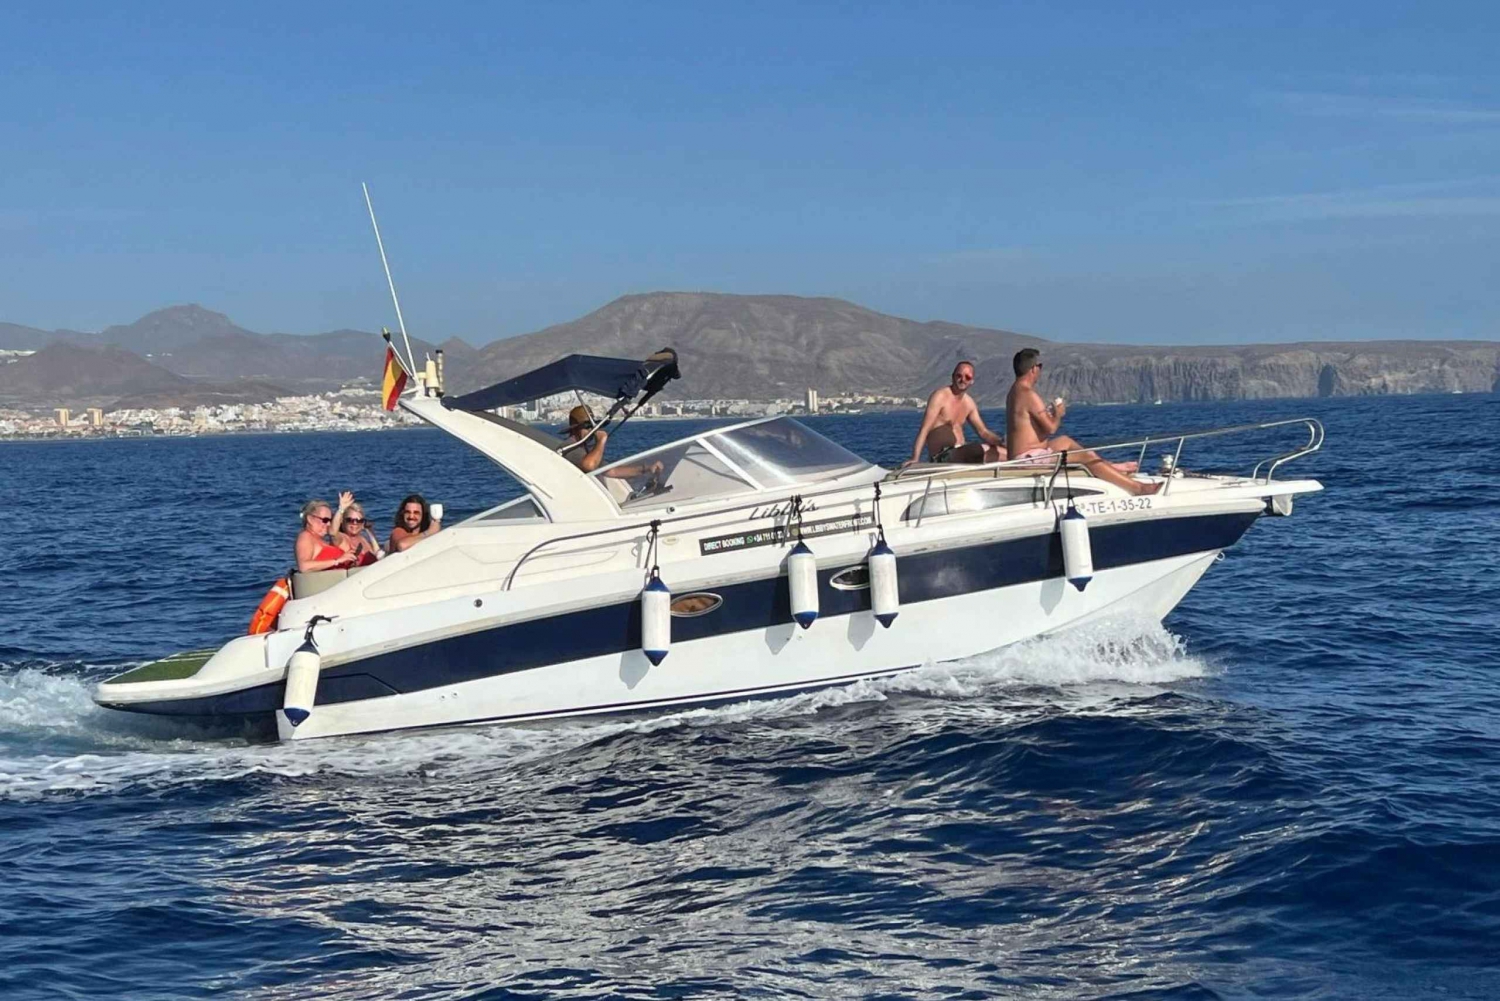 Tenerife: Private Boat Charter with Tapas and Drinks